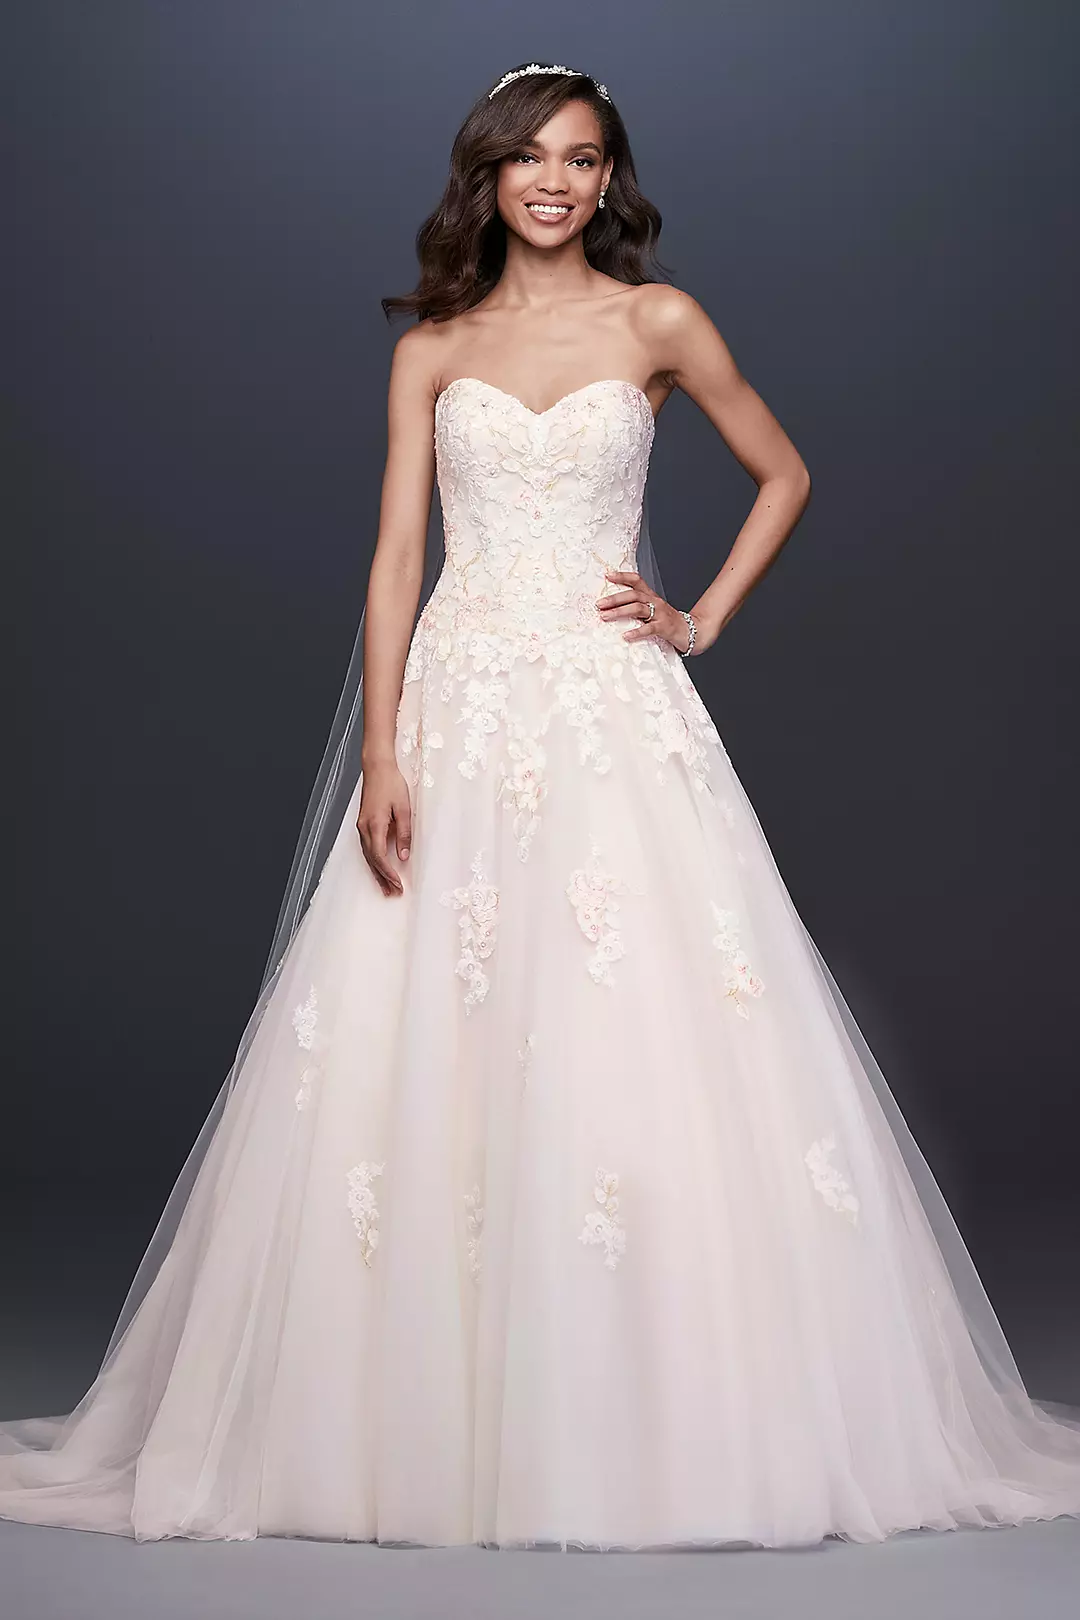 As-Is Embroidered Applique Ball Gown Wedding Dress Image